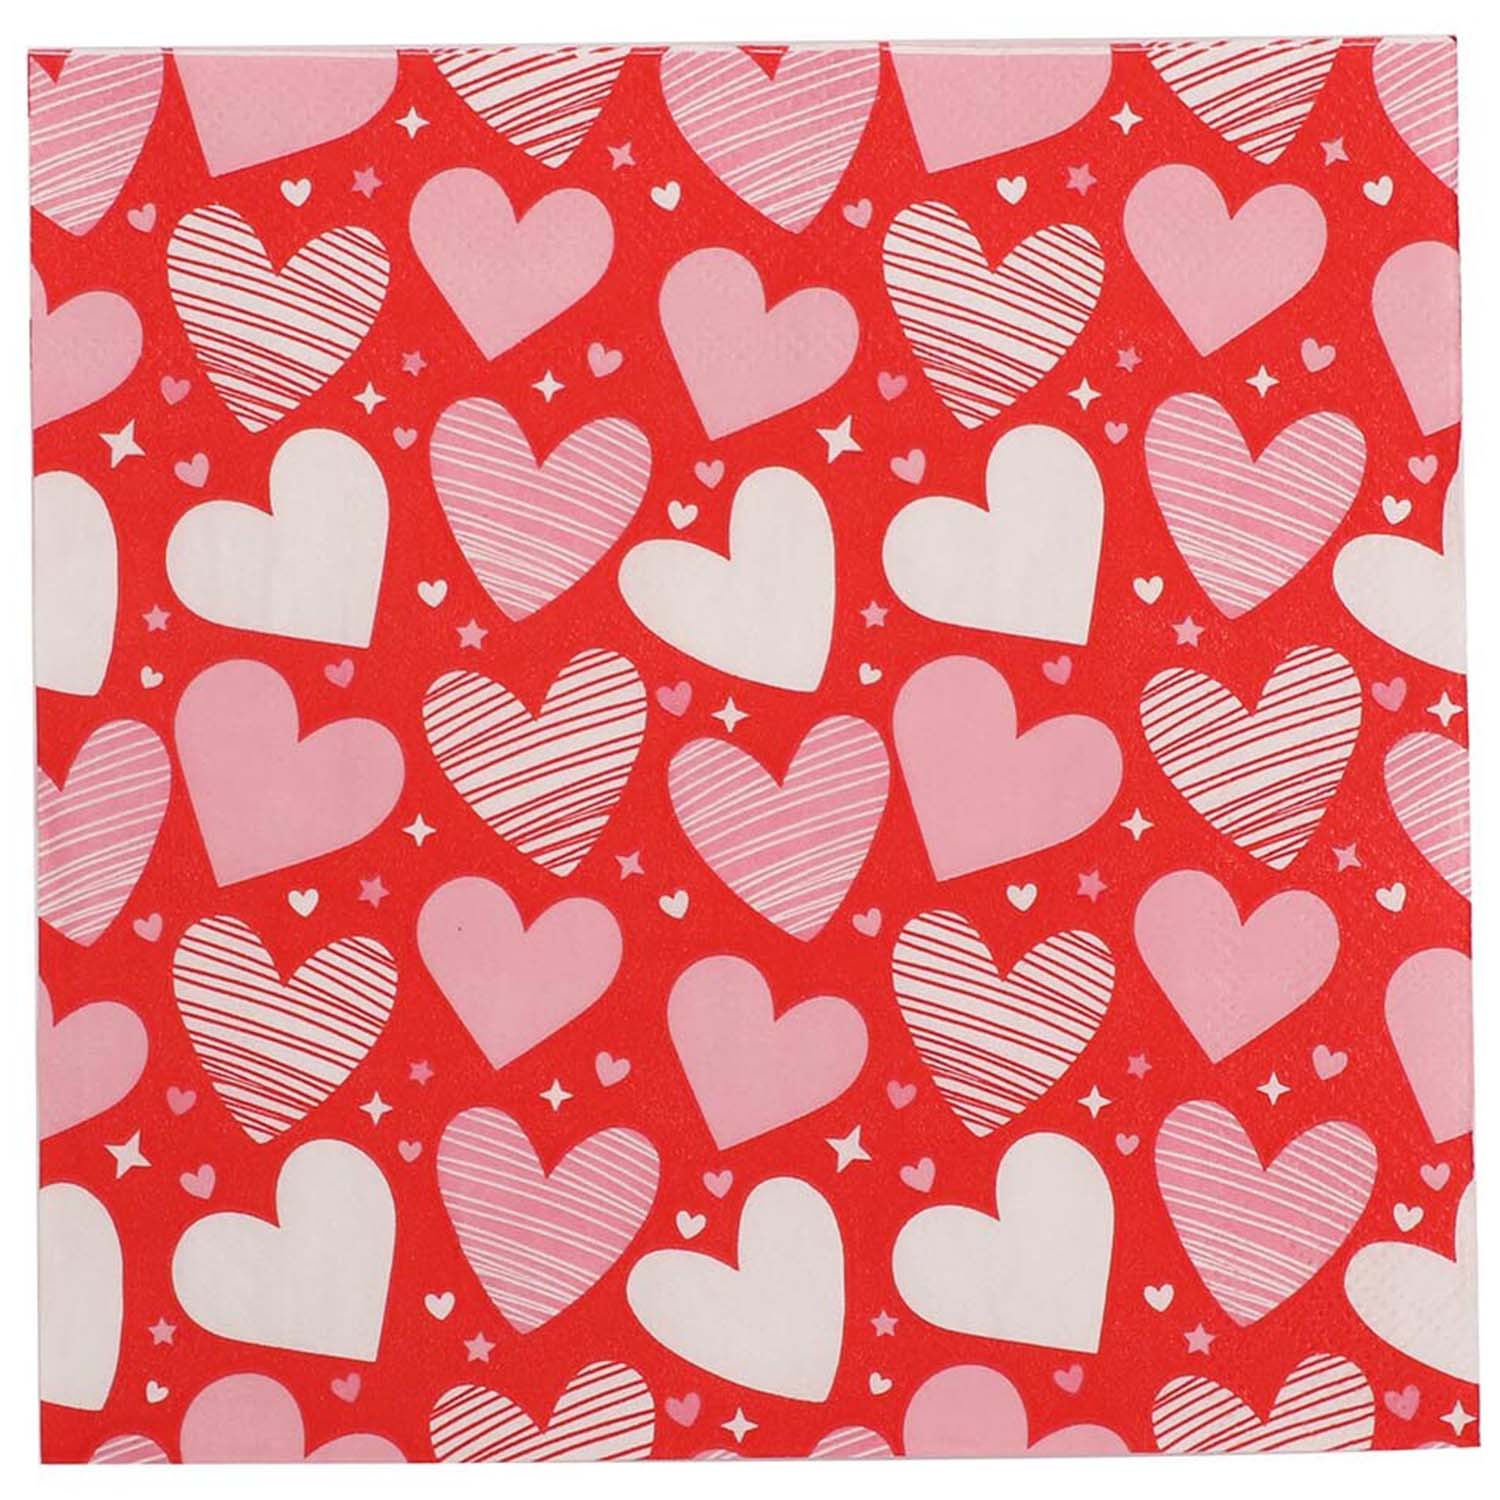 Pack of 16 Heart Napkins  - Red Image 2